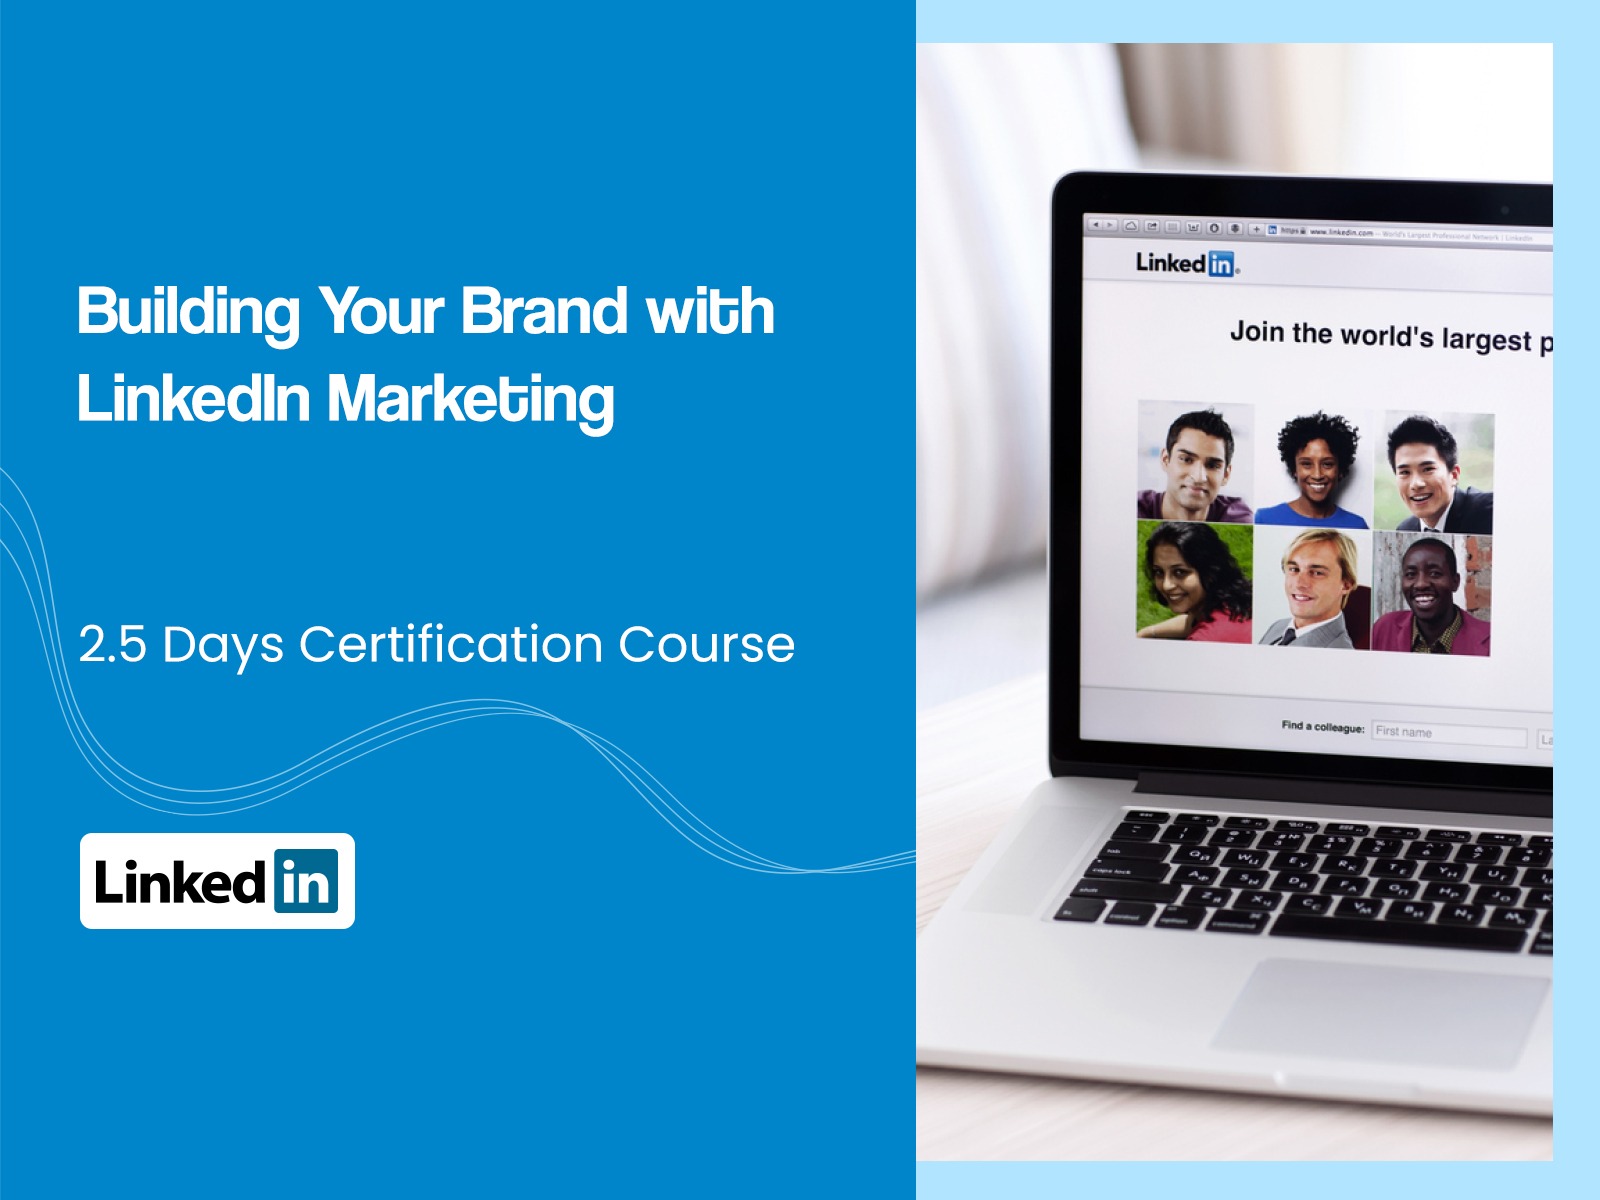 Building Your Brand with LinkedIn Marketing